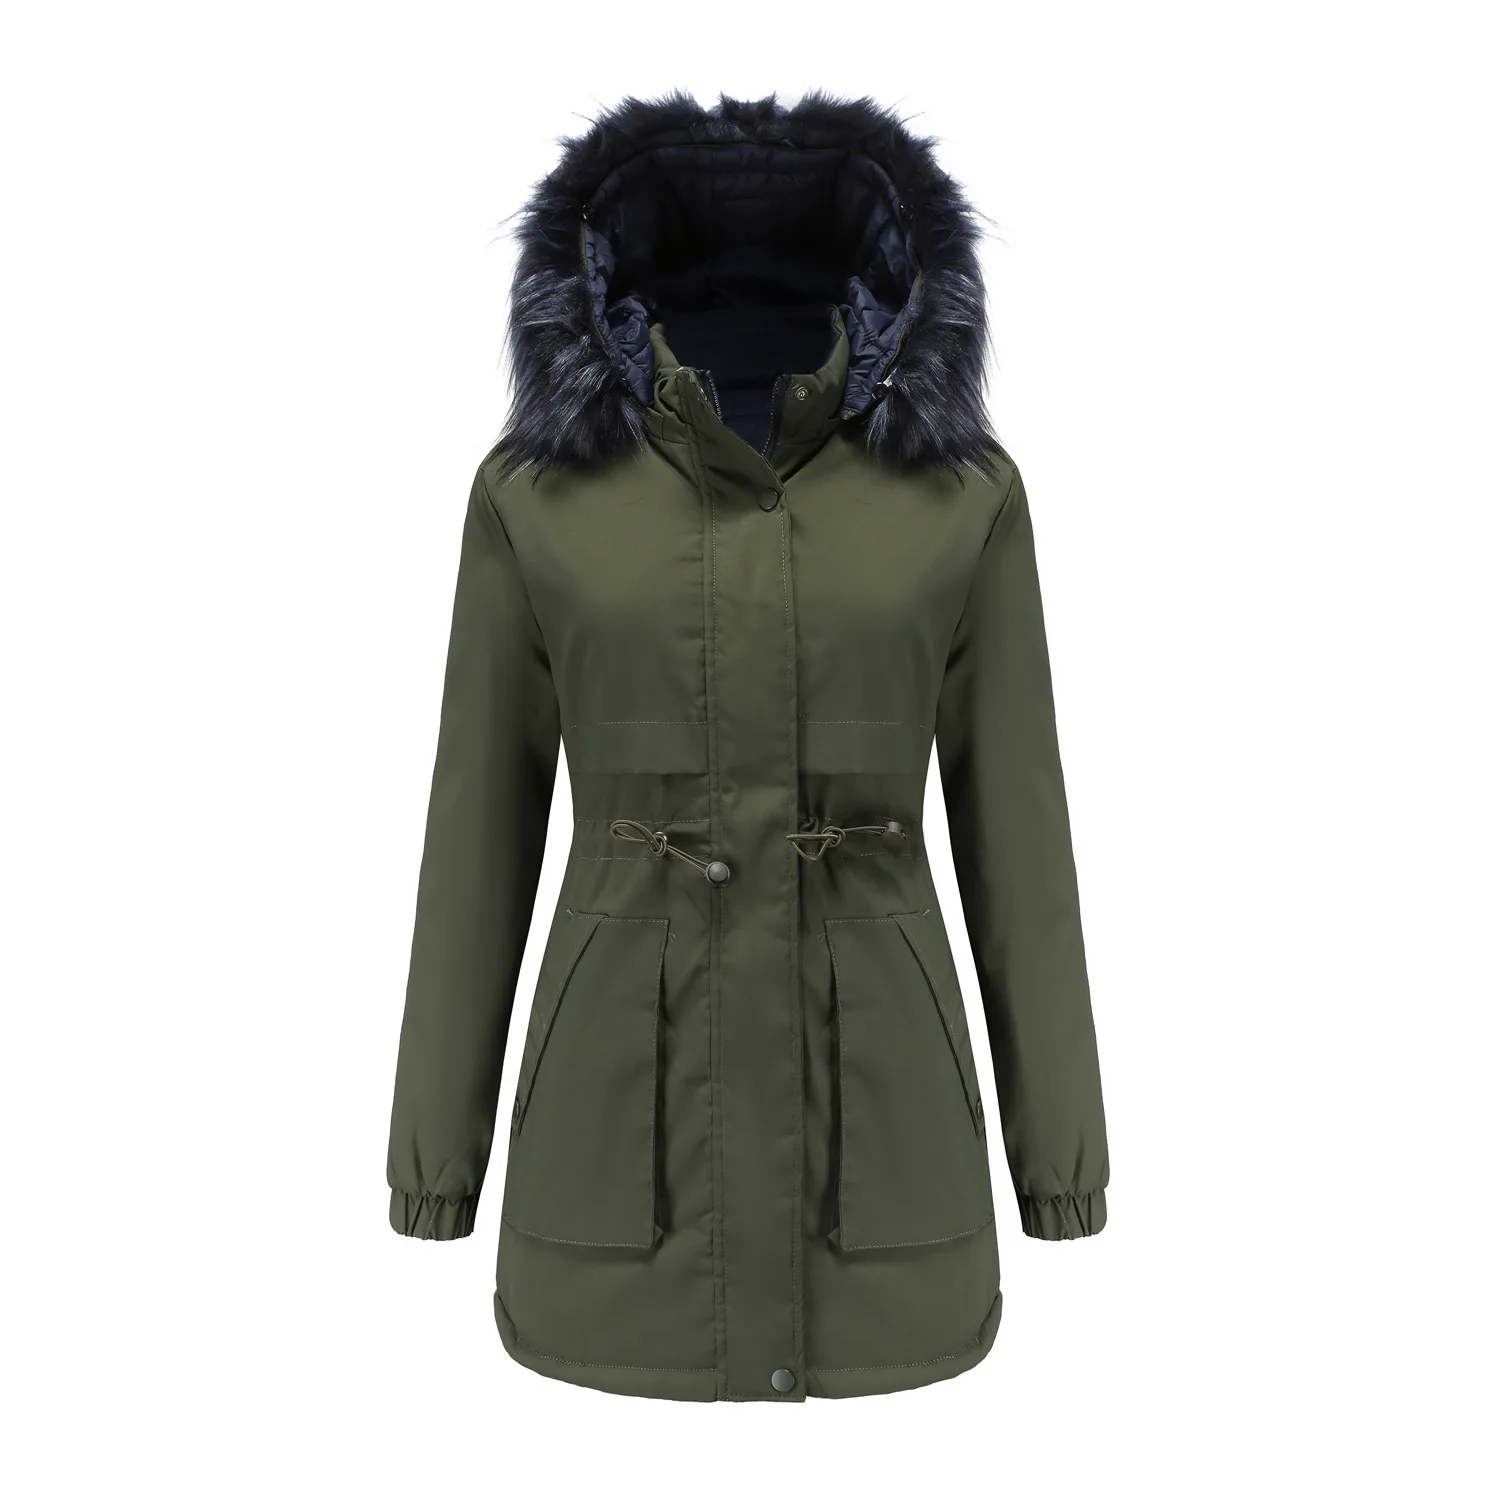 New Reversible Long Jacket for Women Winter Outdoor Hooded Warm Coat with Faux Fur Collar Windproof Cotton Padded Outwear